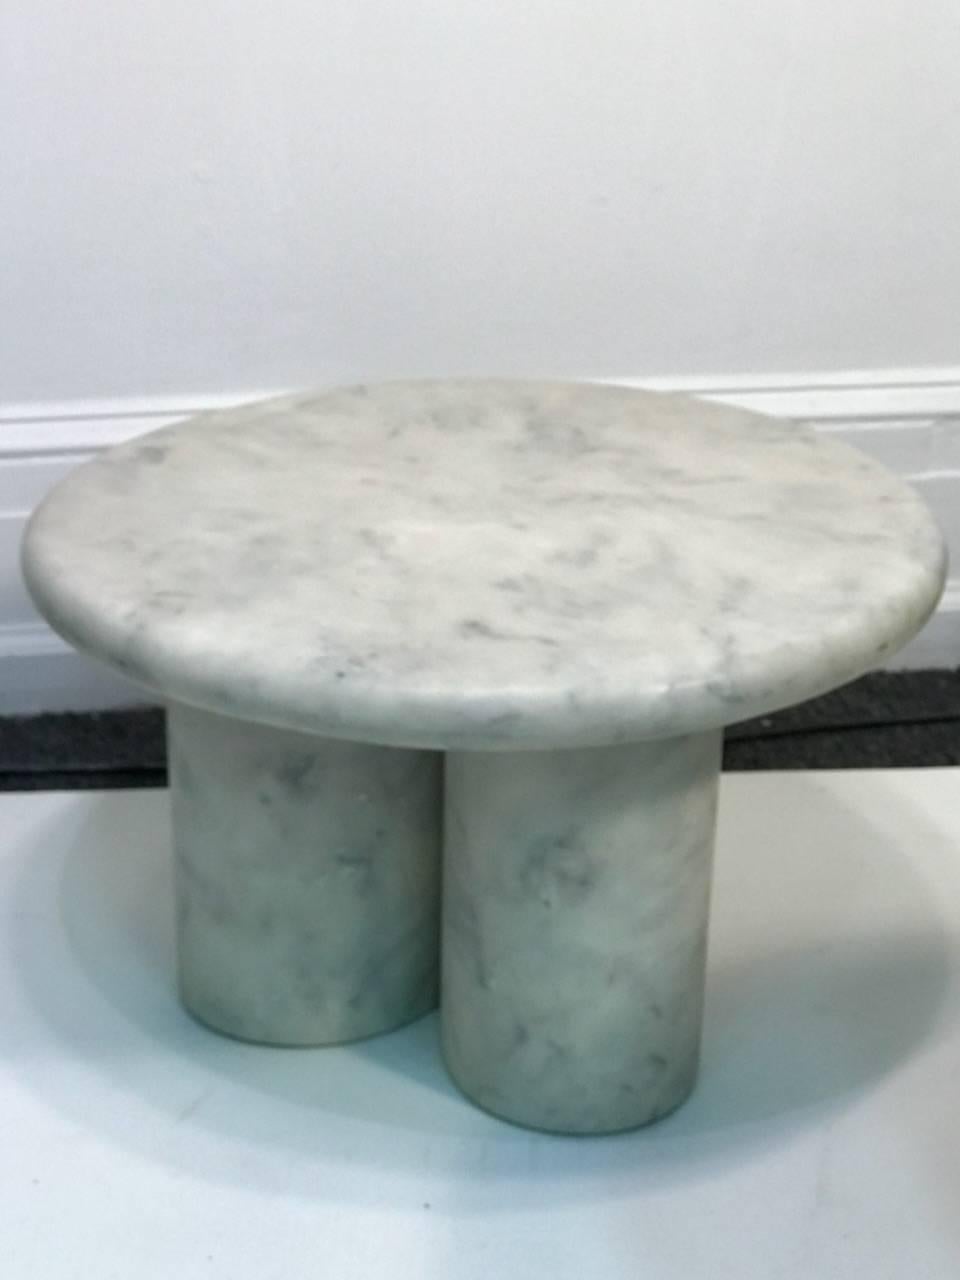 Set of three marble resin tables each with three rounded column legs. Each one is a variance in height. Designed in Italy in the 1970s each one has a measure: 20